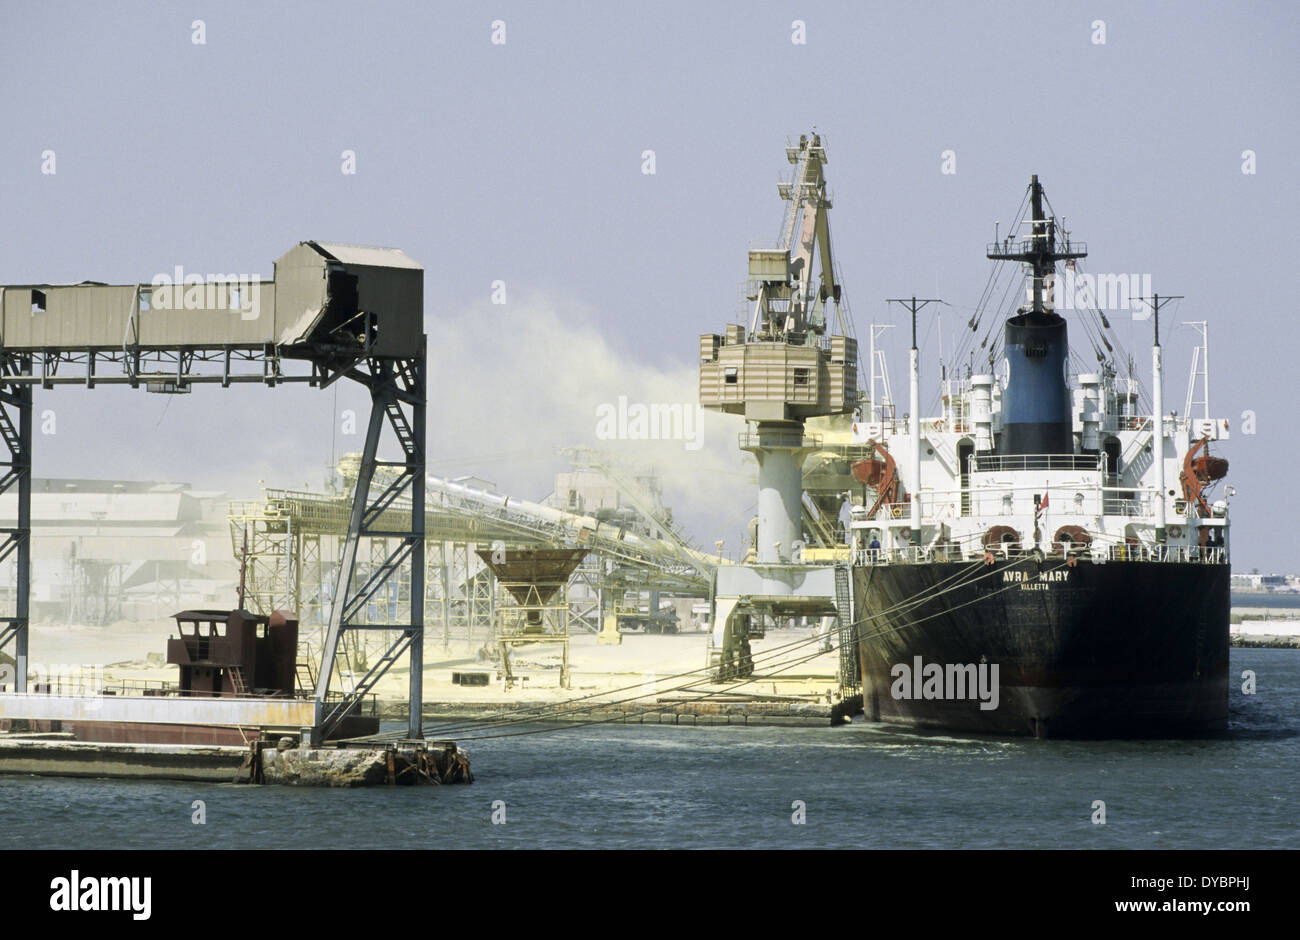 TUNISIA, port Sfax, bulk carrier vessel is loaded with phosphate which  contains heavy metals like Cadmium and Phosphorus. Phosphorus is used as  important fertilizer in the agriculture, the phosphate is mined in